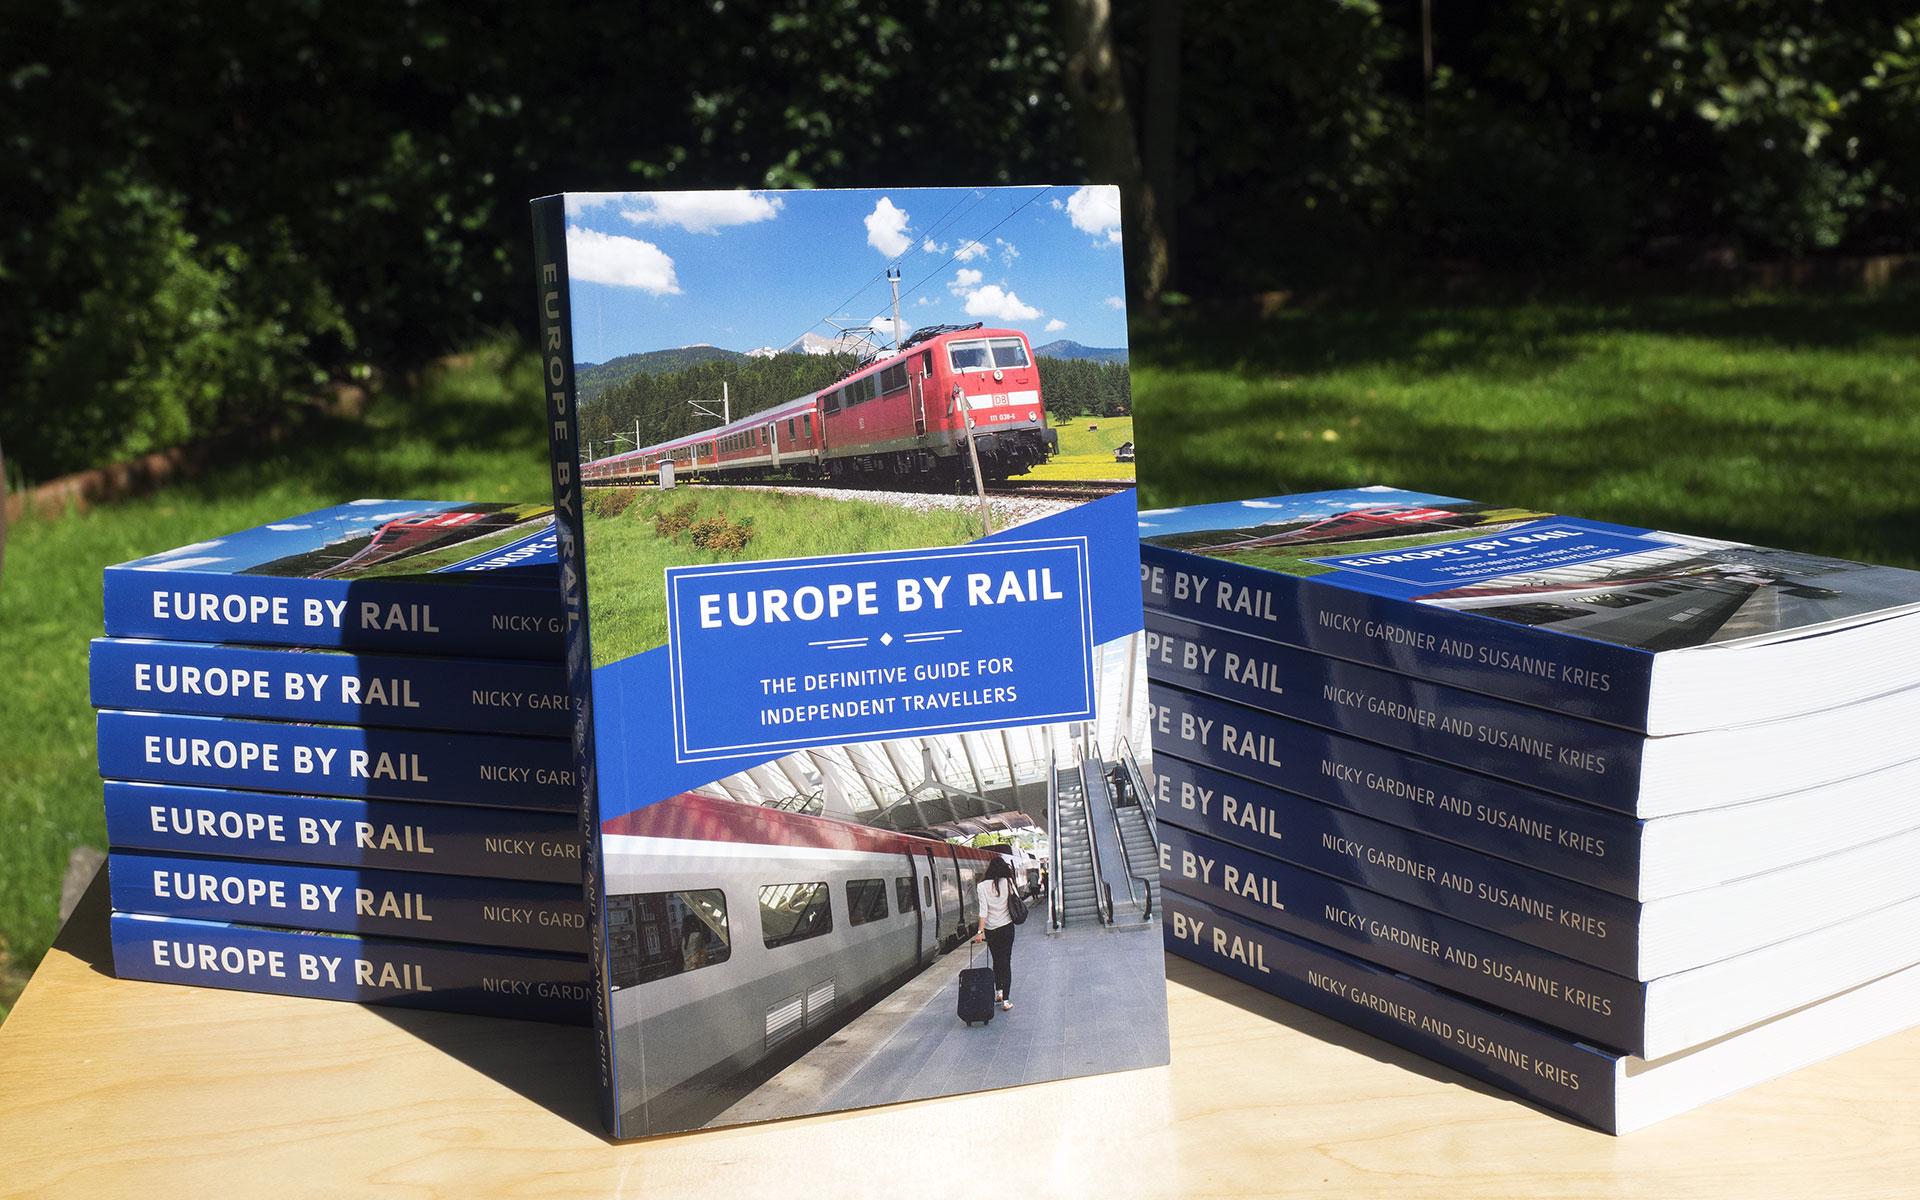 The 14th edition of Europe by Rail: The Definitive Guide for Independent Travellers - written by Nicky Gardner and Susanne Kries